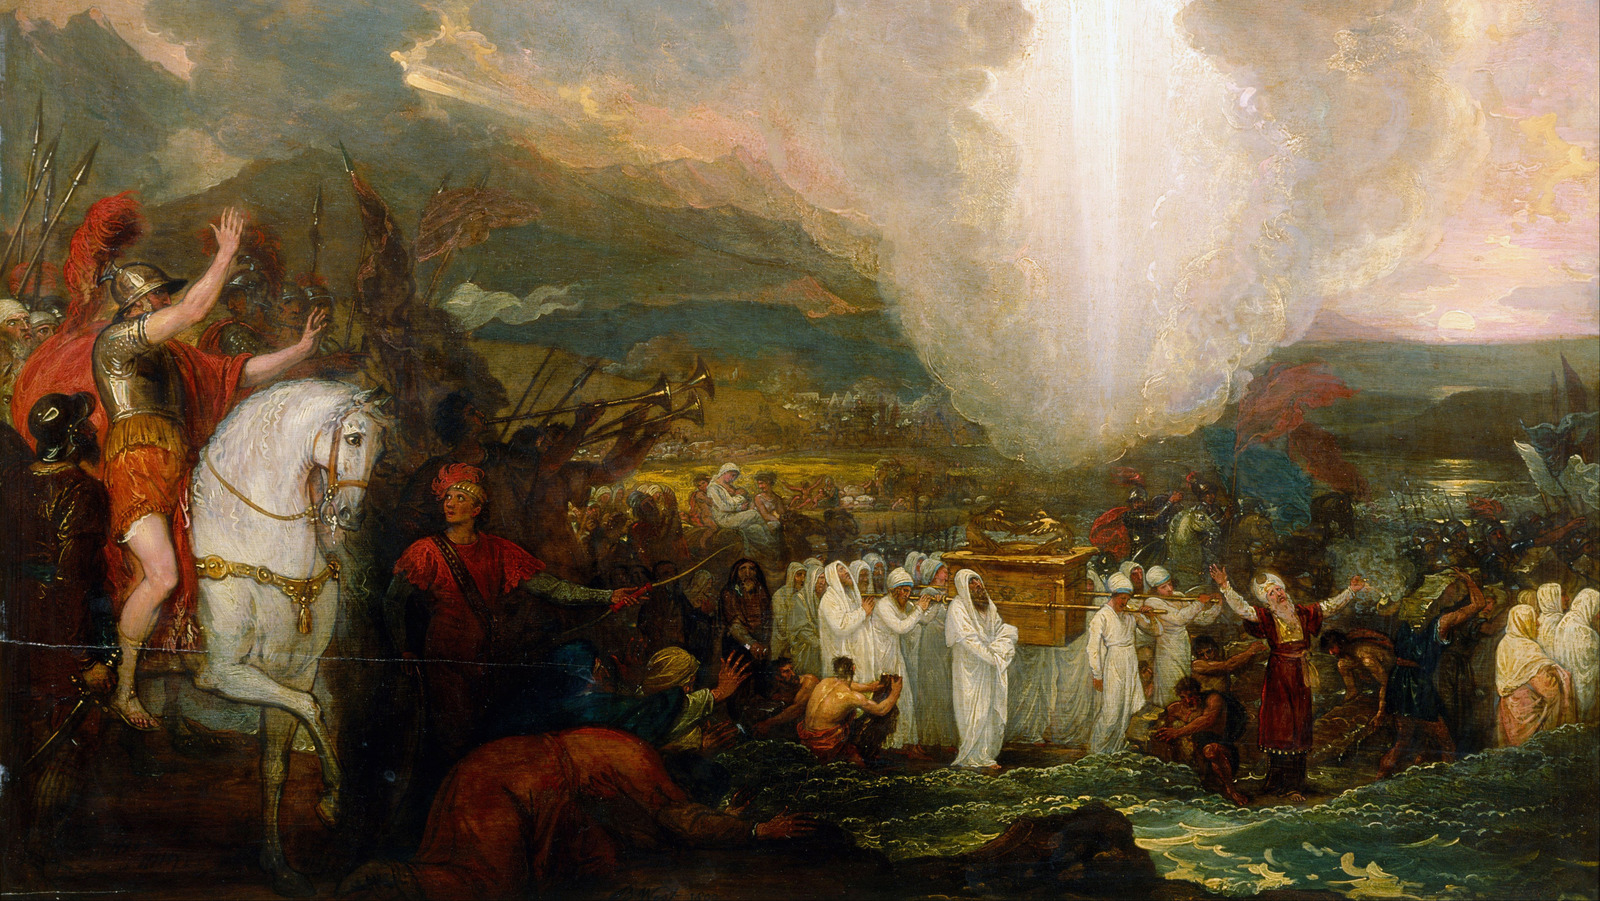 From Moses to Joshua: The Epic Story of the Israelites’ Journey to the Promised Land hero image